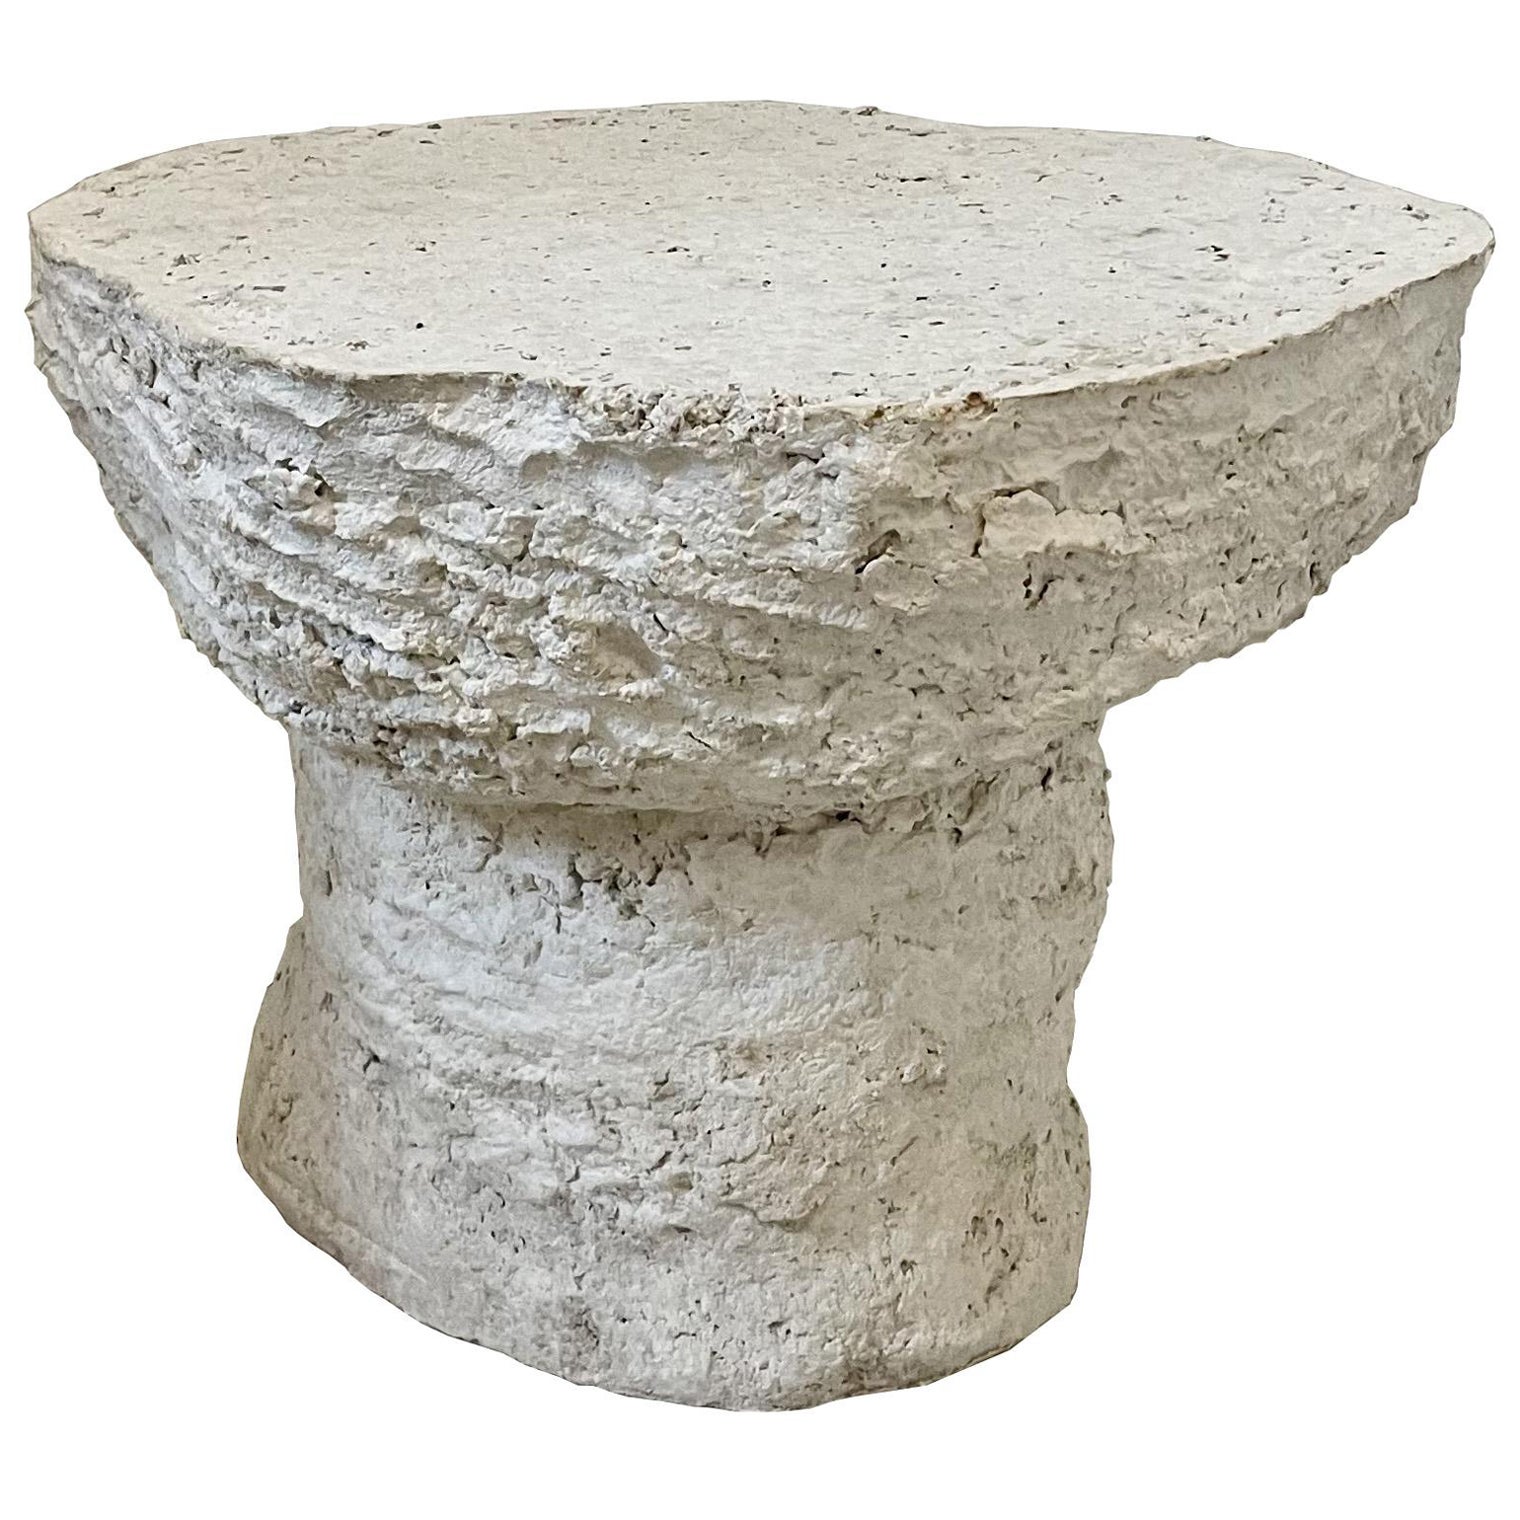 All our podium are hand sculpted and unique. 

They offer a diversity of aspects and finishing depending of the piece. 
Unique piece hand carved in our workshops. recycled cellulose product and local limestone powder. 

Dimensions about H38 cm x